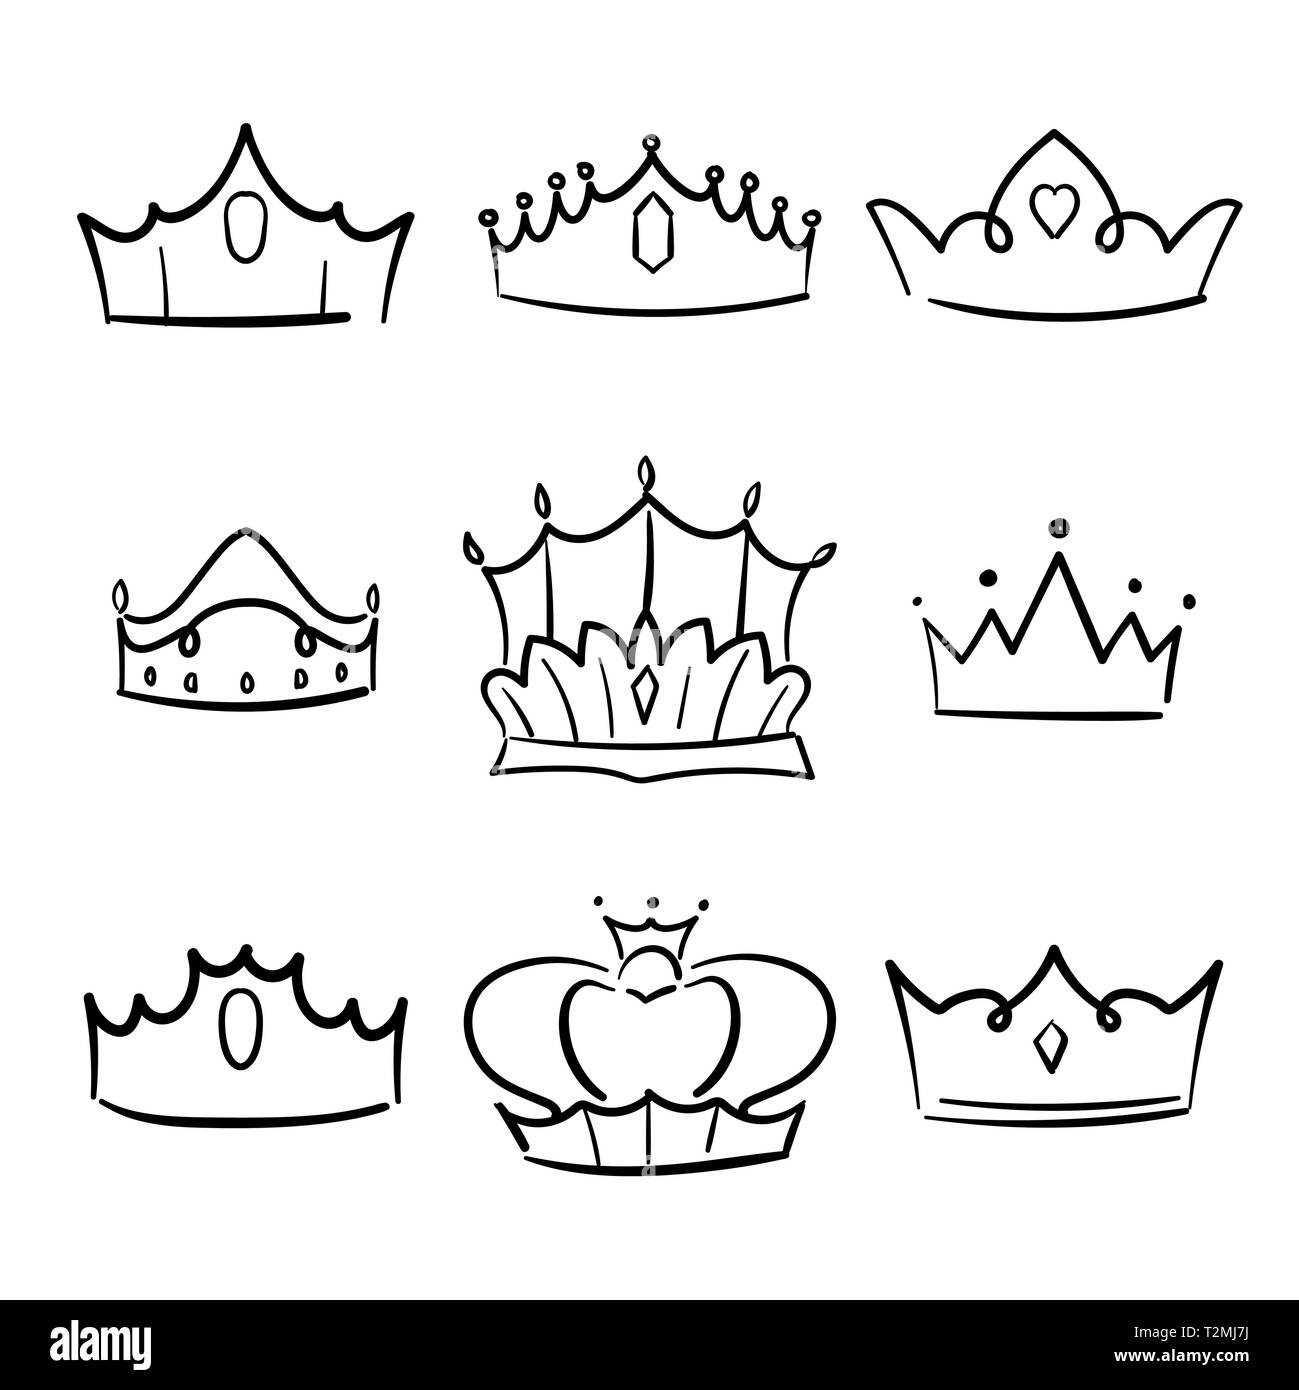 How to Draw a Princess Crown   Easy Step by Step Drawing Guide Tutorial   YouTube